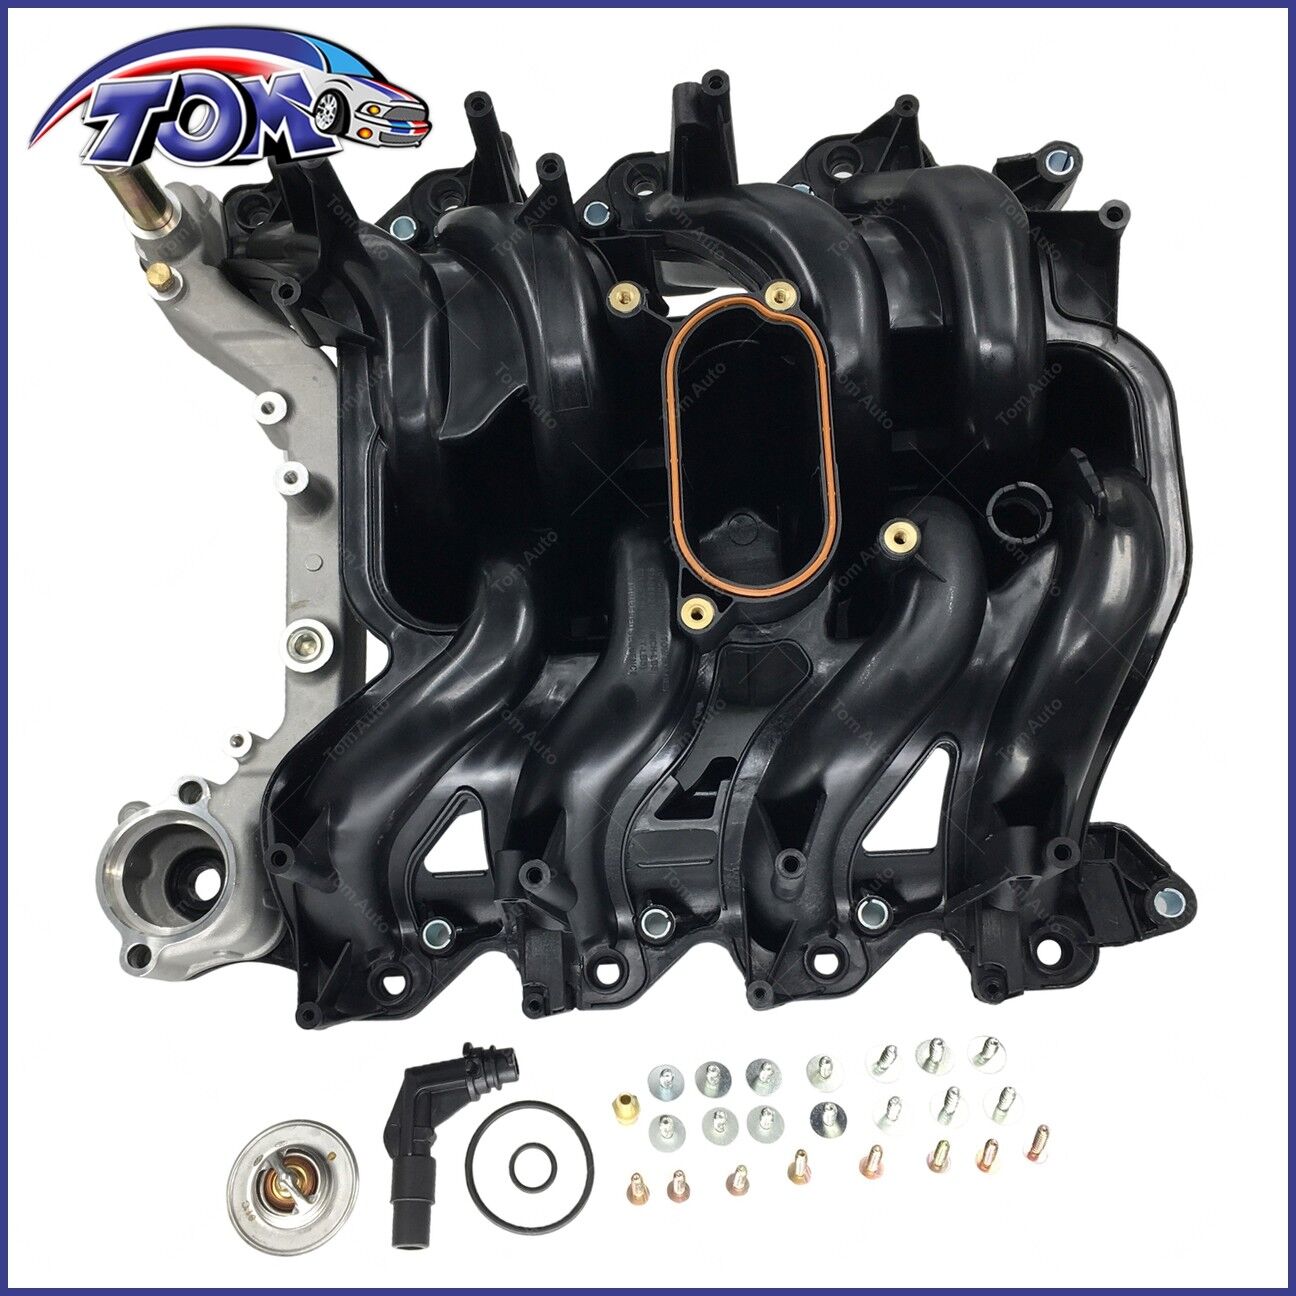 Upper Intake Manifold w/ Gaskets For Ford E-Series F-Series Pickup Truck 5.4L V8